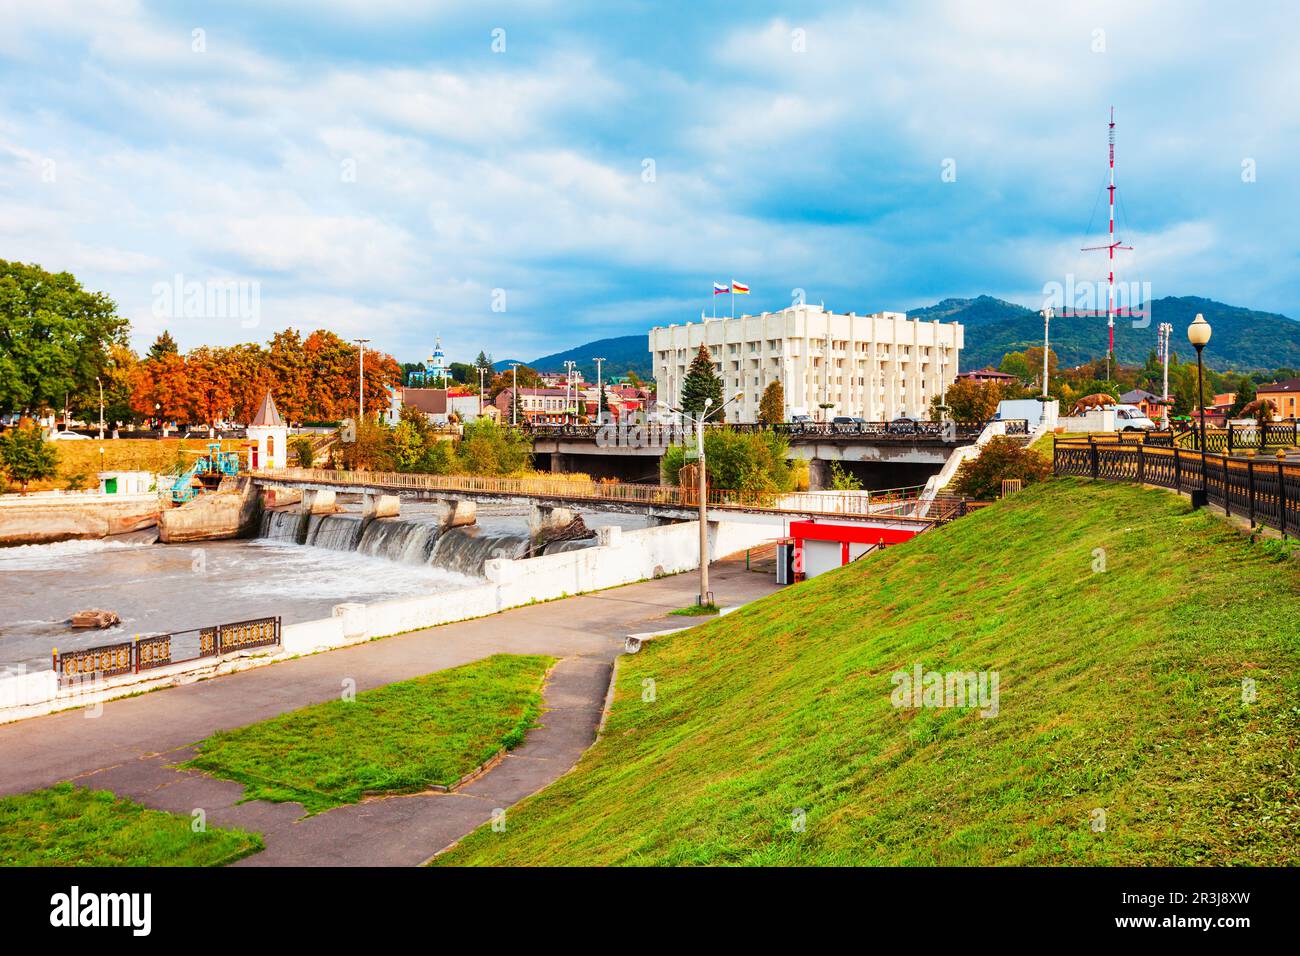 City administration building at the Terek river embankment in the centre of Vladikavkaz city, North Ossetia Alania, Russia Stock Photo